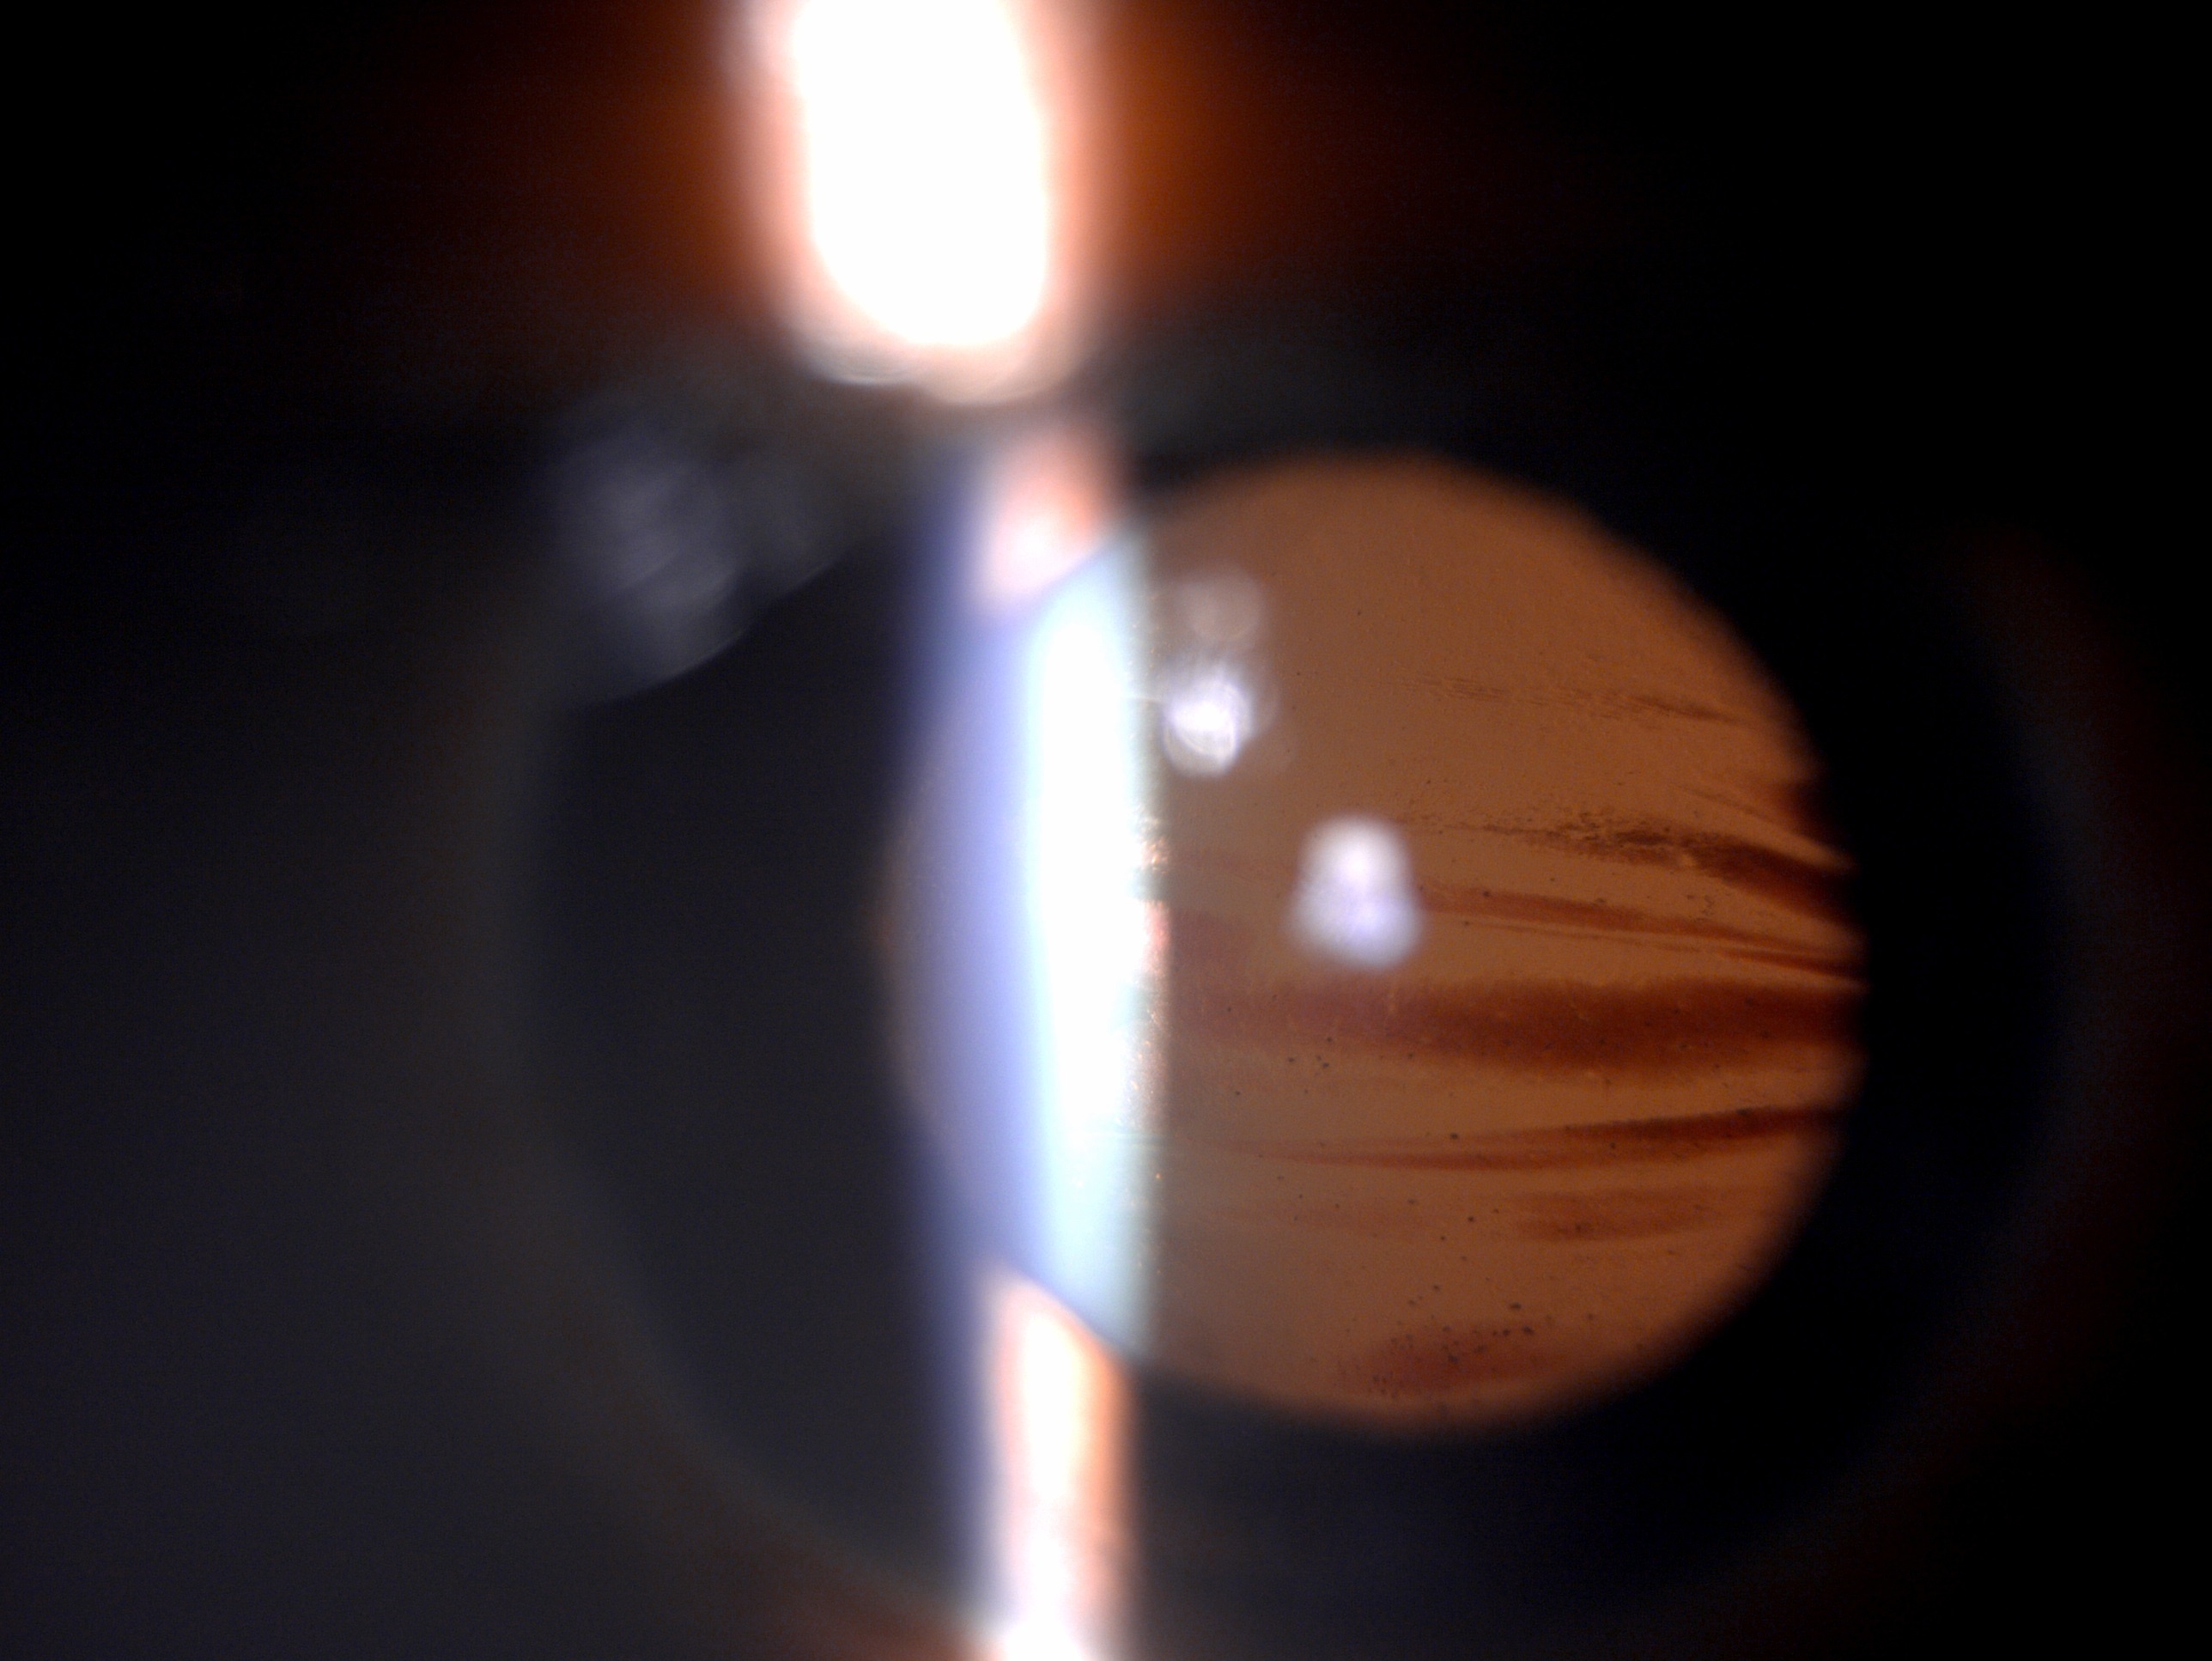 Slit lamp image of the patient with blunt ocular trauma (closed globe injury) depicting blood staining of the anterior lens capsule